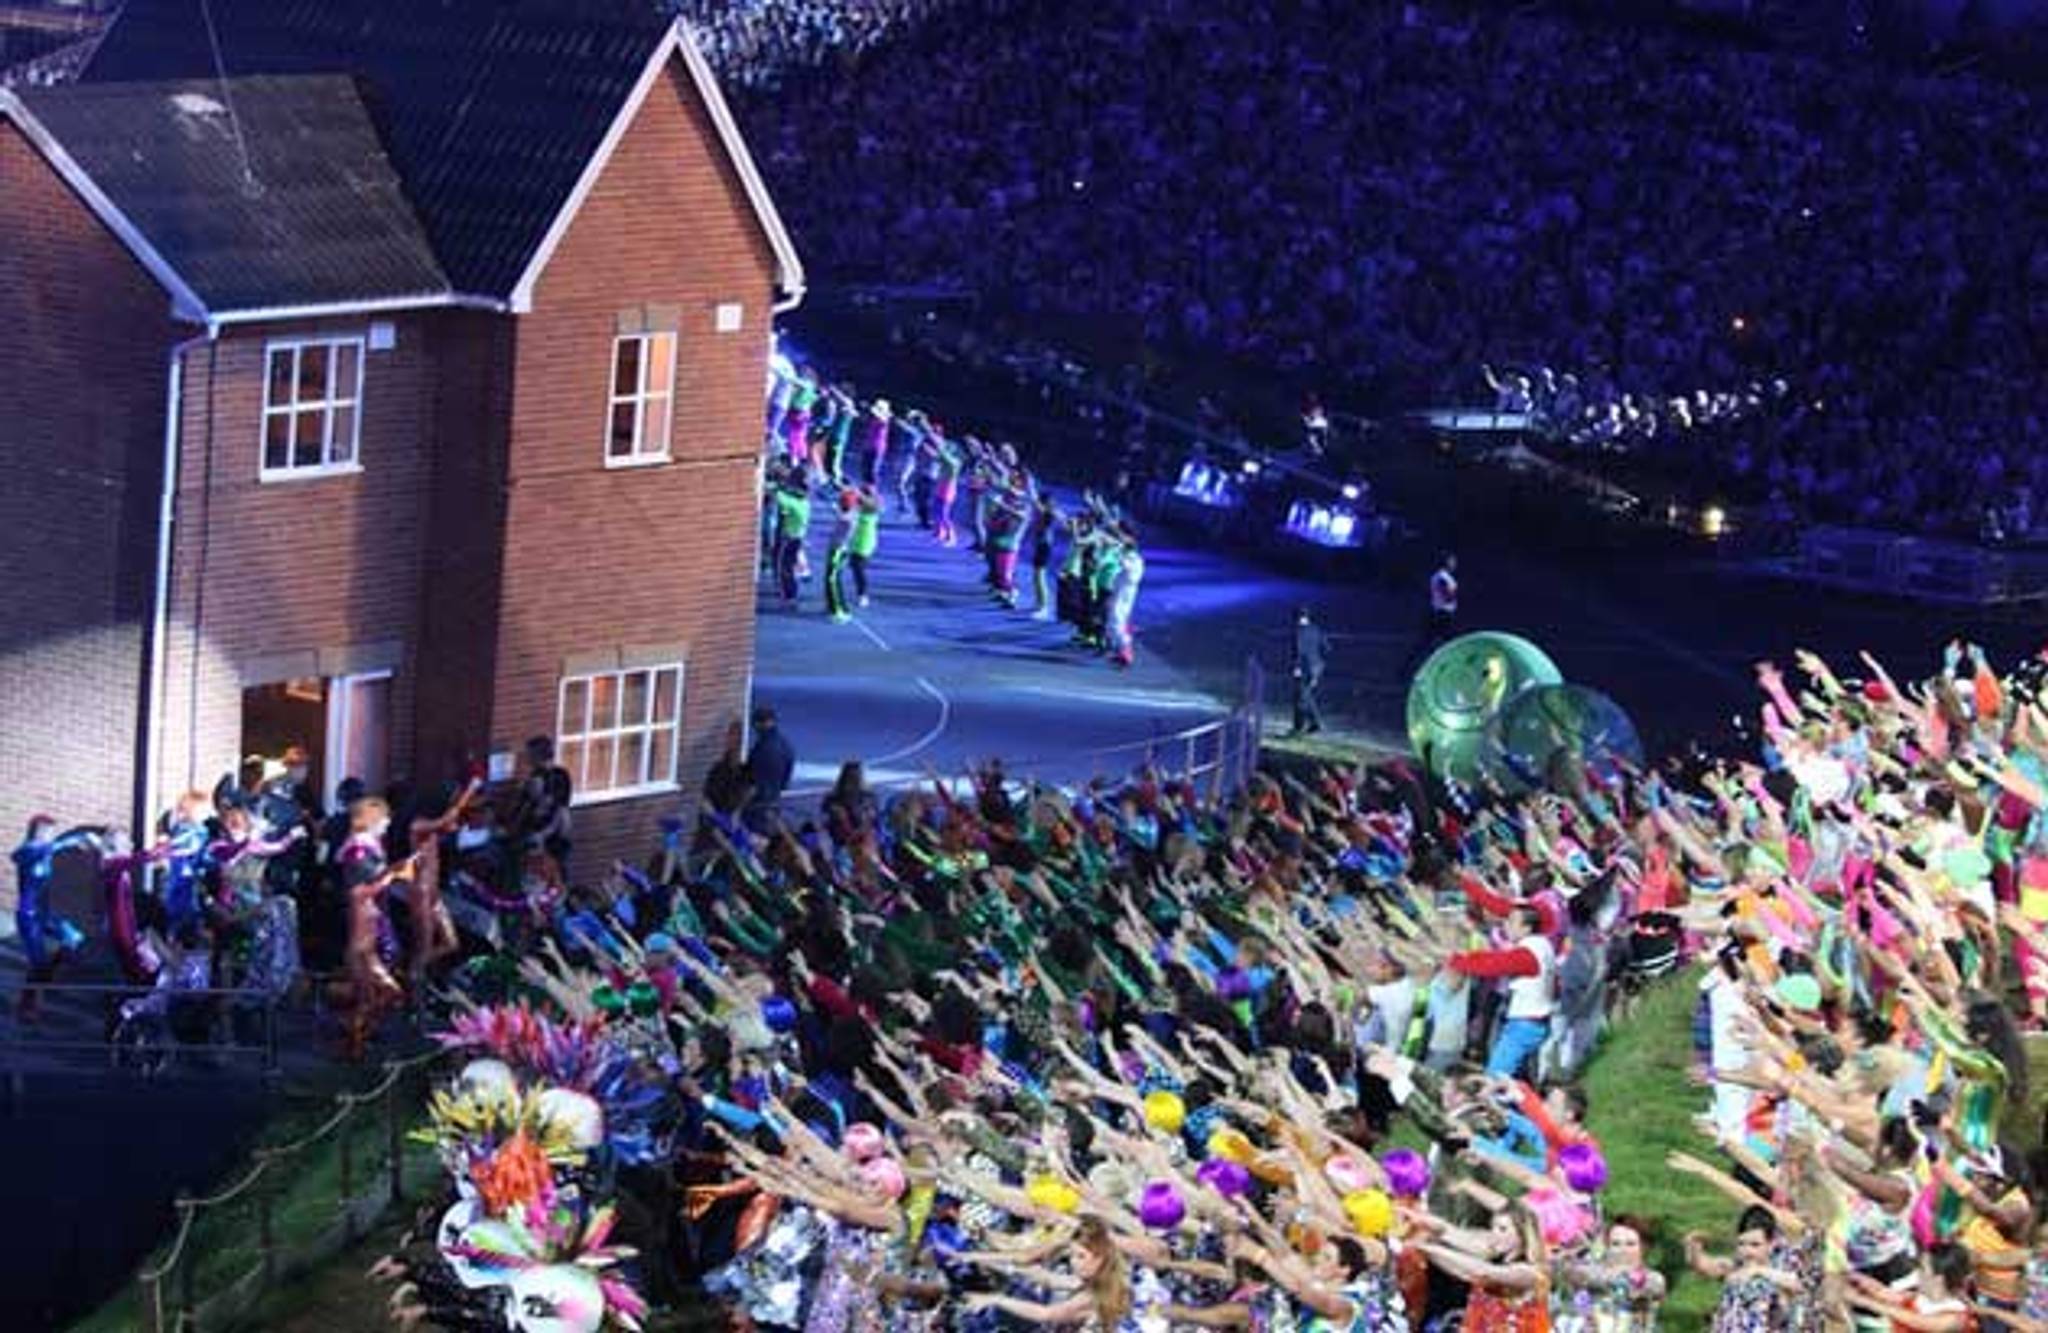 Olympics 2012 Opening Ceremony: is this for everyone?